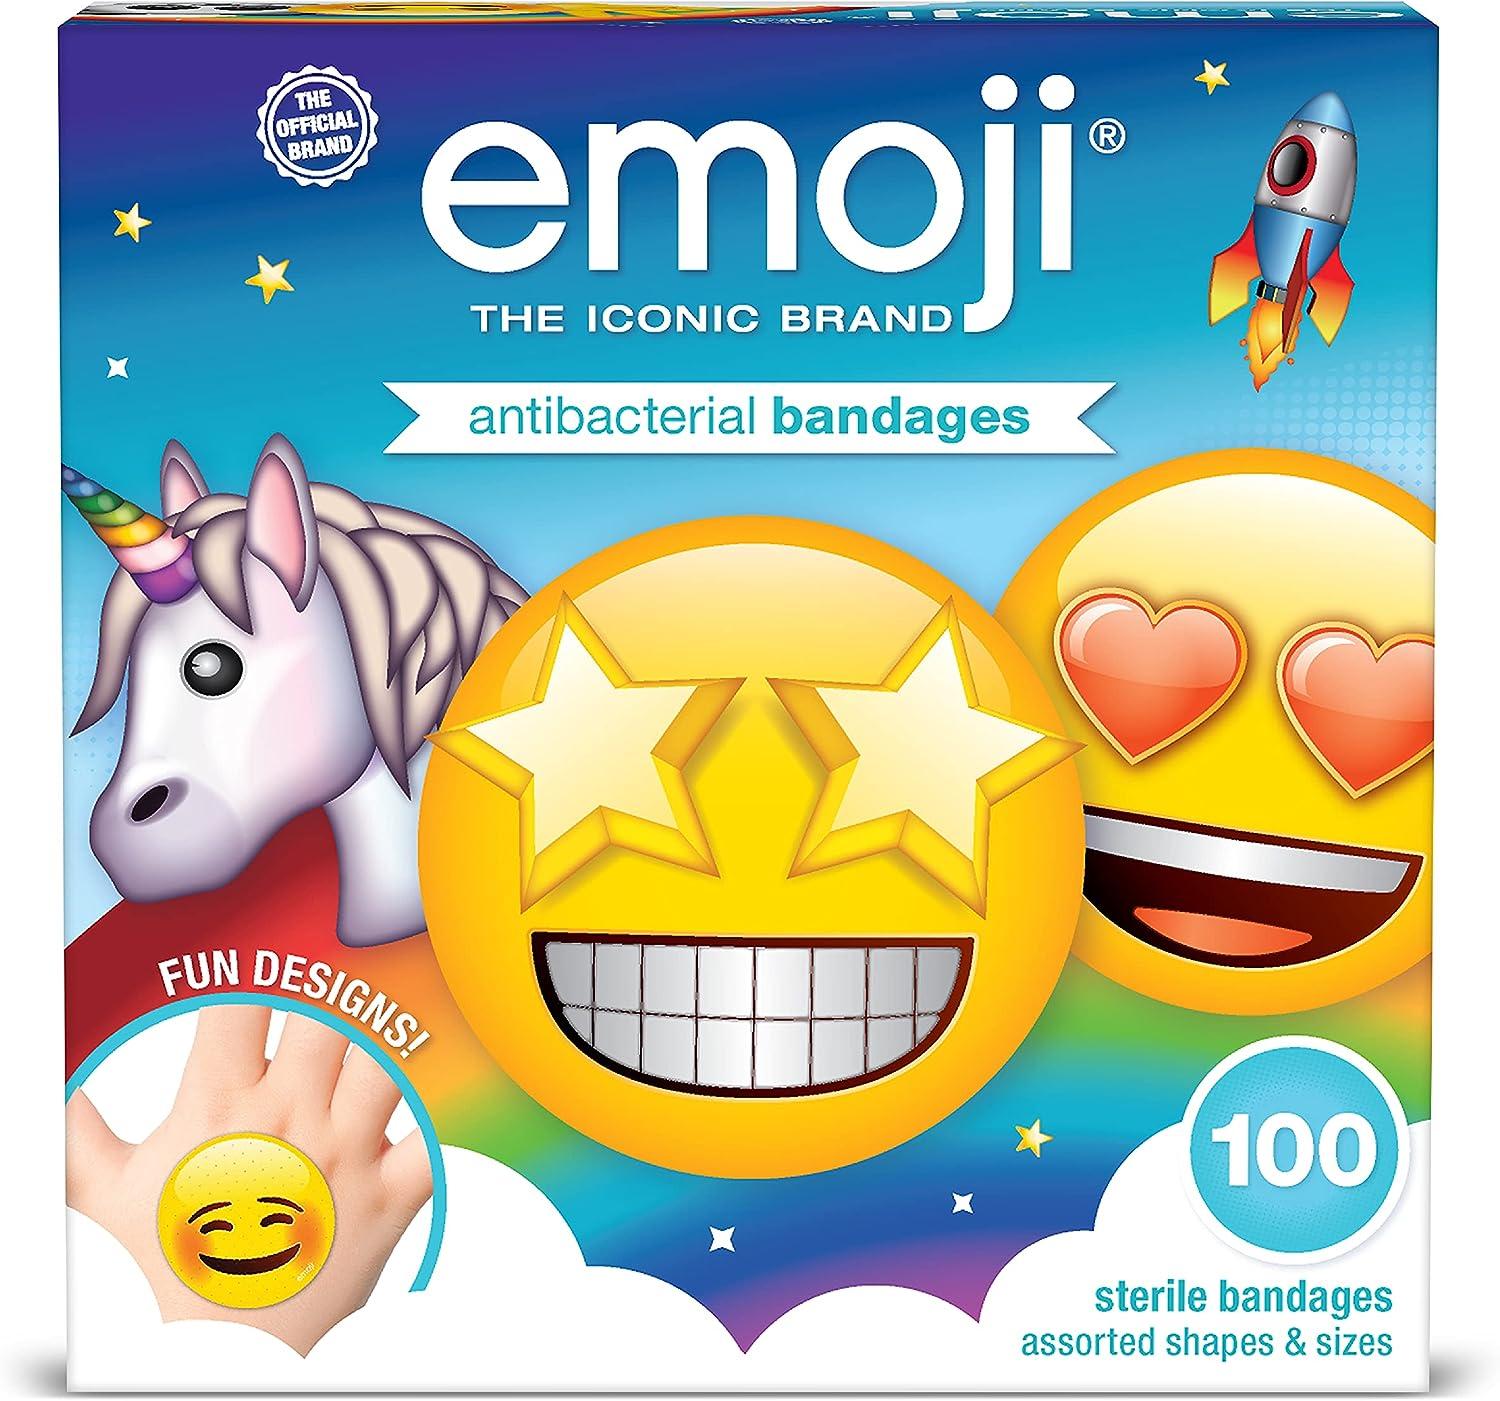 Stickers, Novelty Toys, Character Bandages & Giveaways for Your